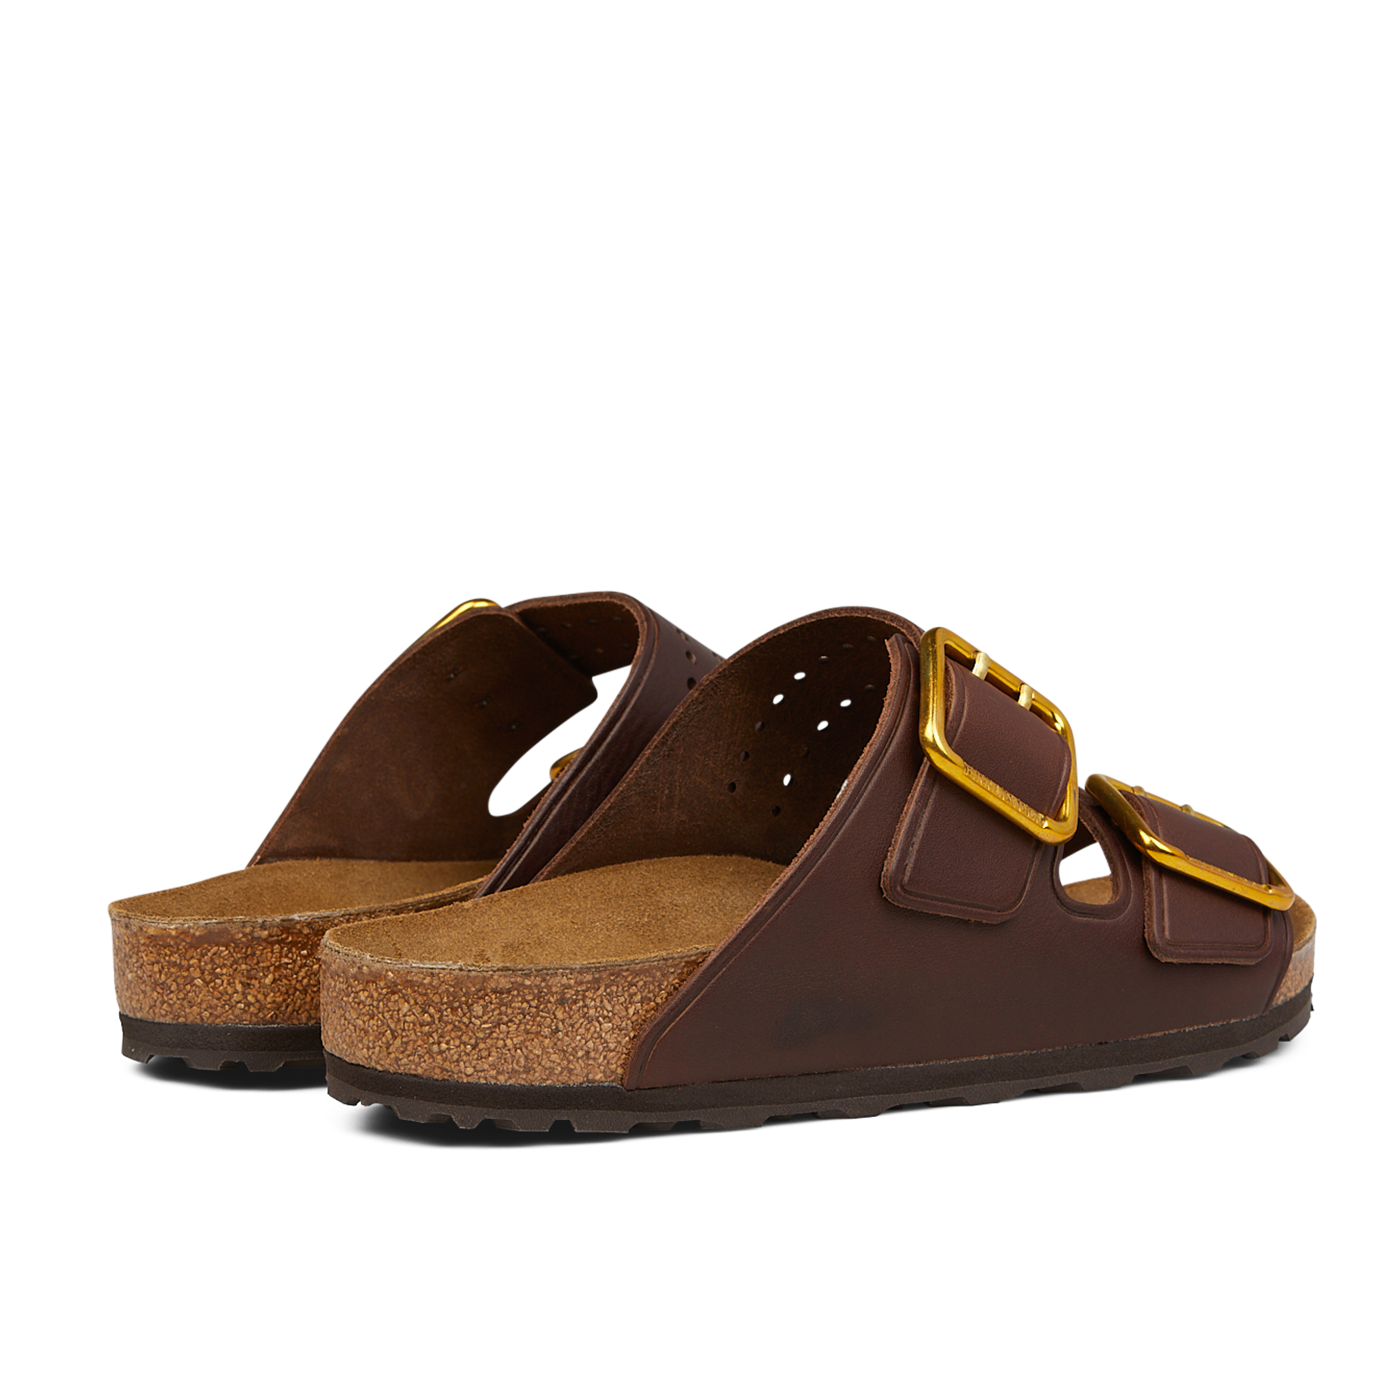 A pair of brown, open-toe sandals with cork soles and two wide straps featuring large gold buckles. The Birkenstock Roast Bold Natural Leather Arizona Sandals, crafted with a natural leather upper, are viewed from the back and side and include an anatomically-supported footbed for added comfort.